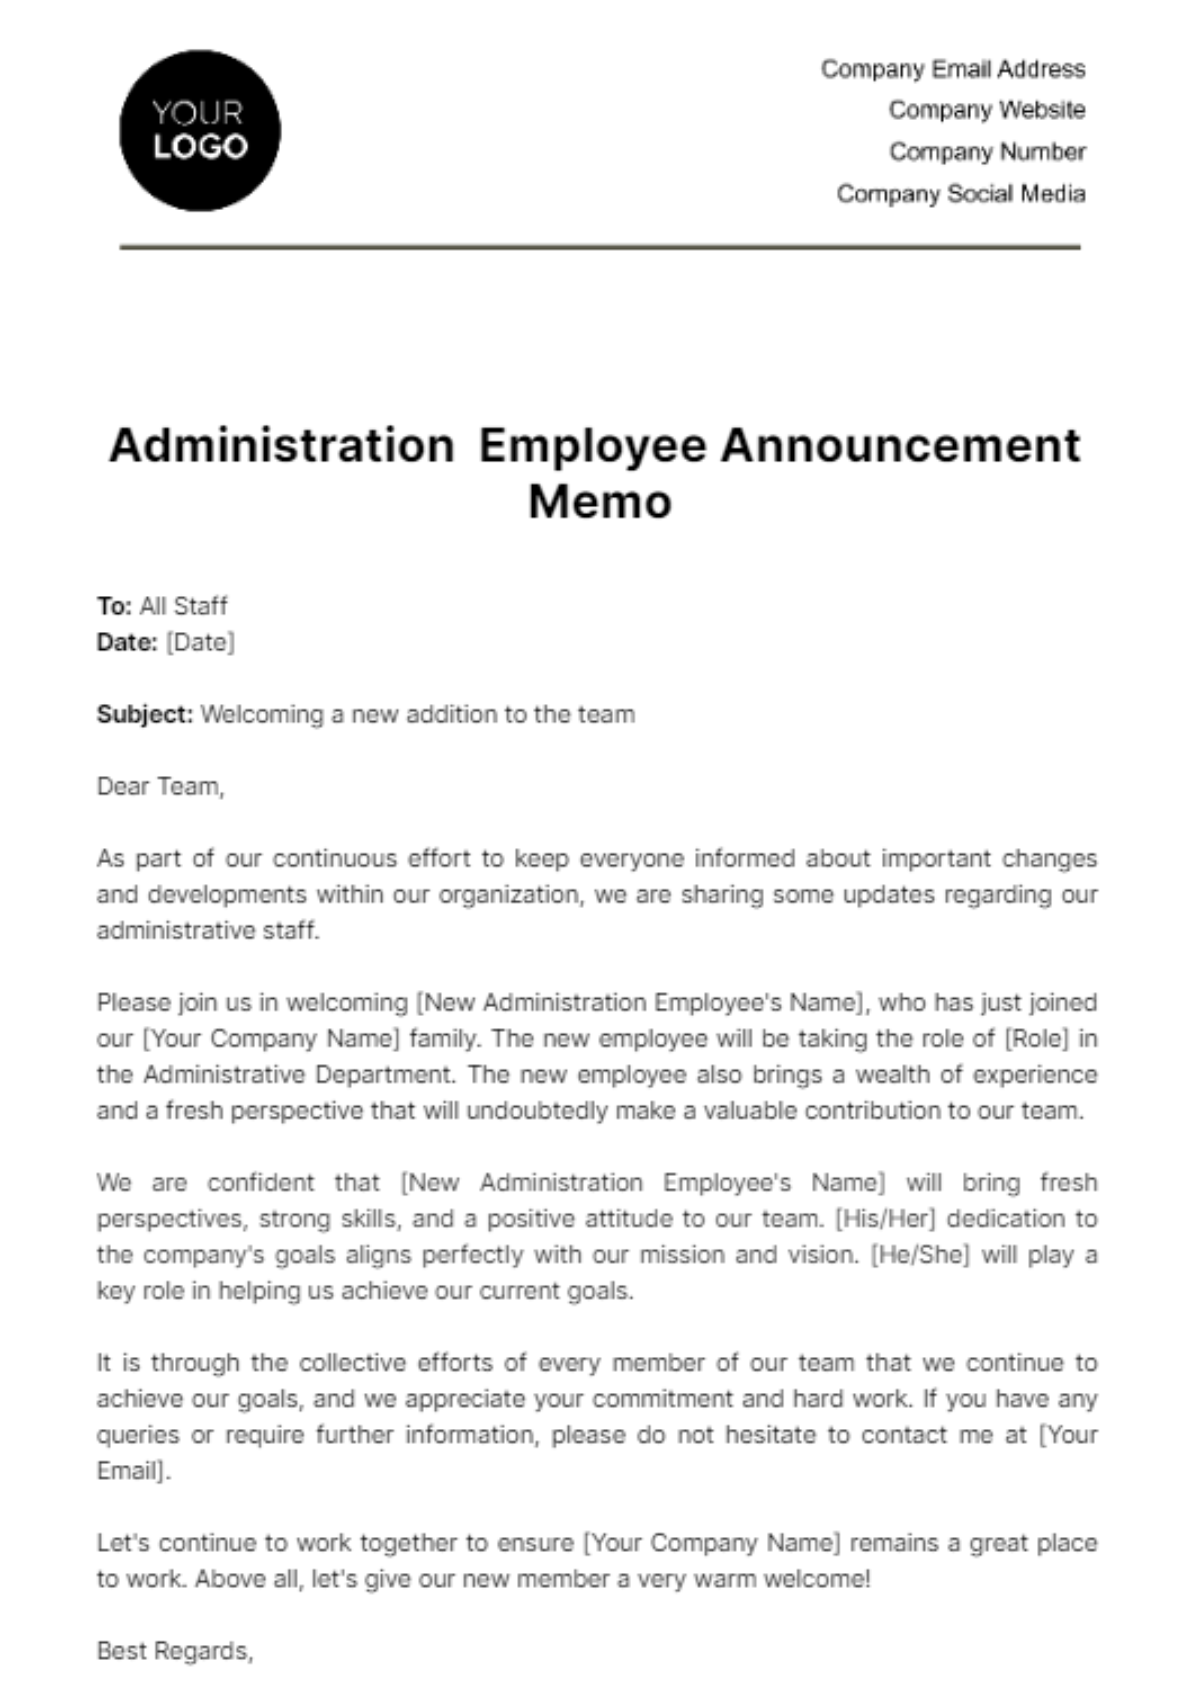 Free Administration Employee Announcement Memo Template